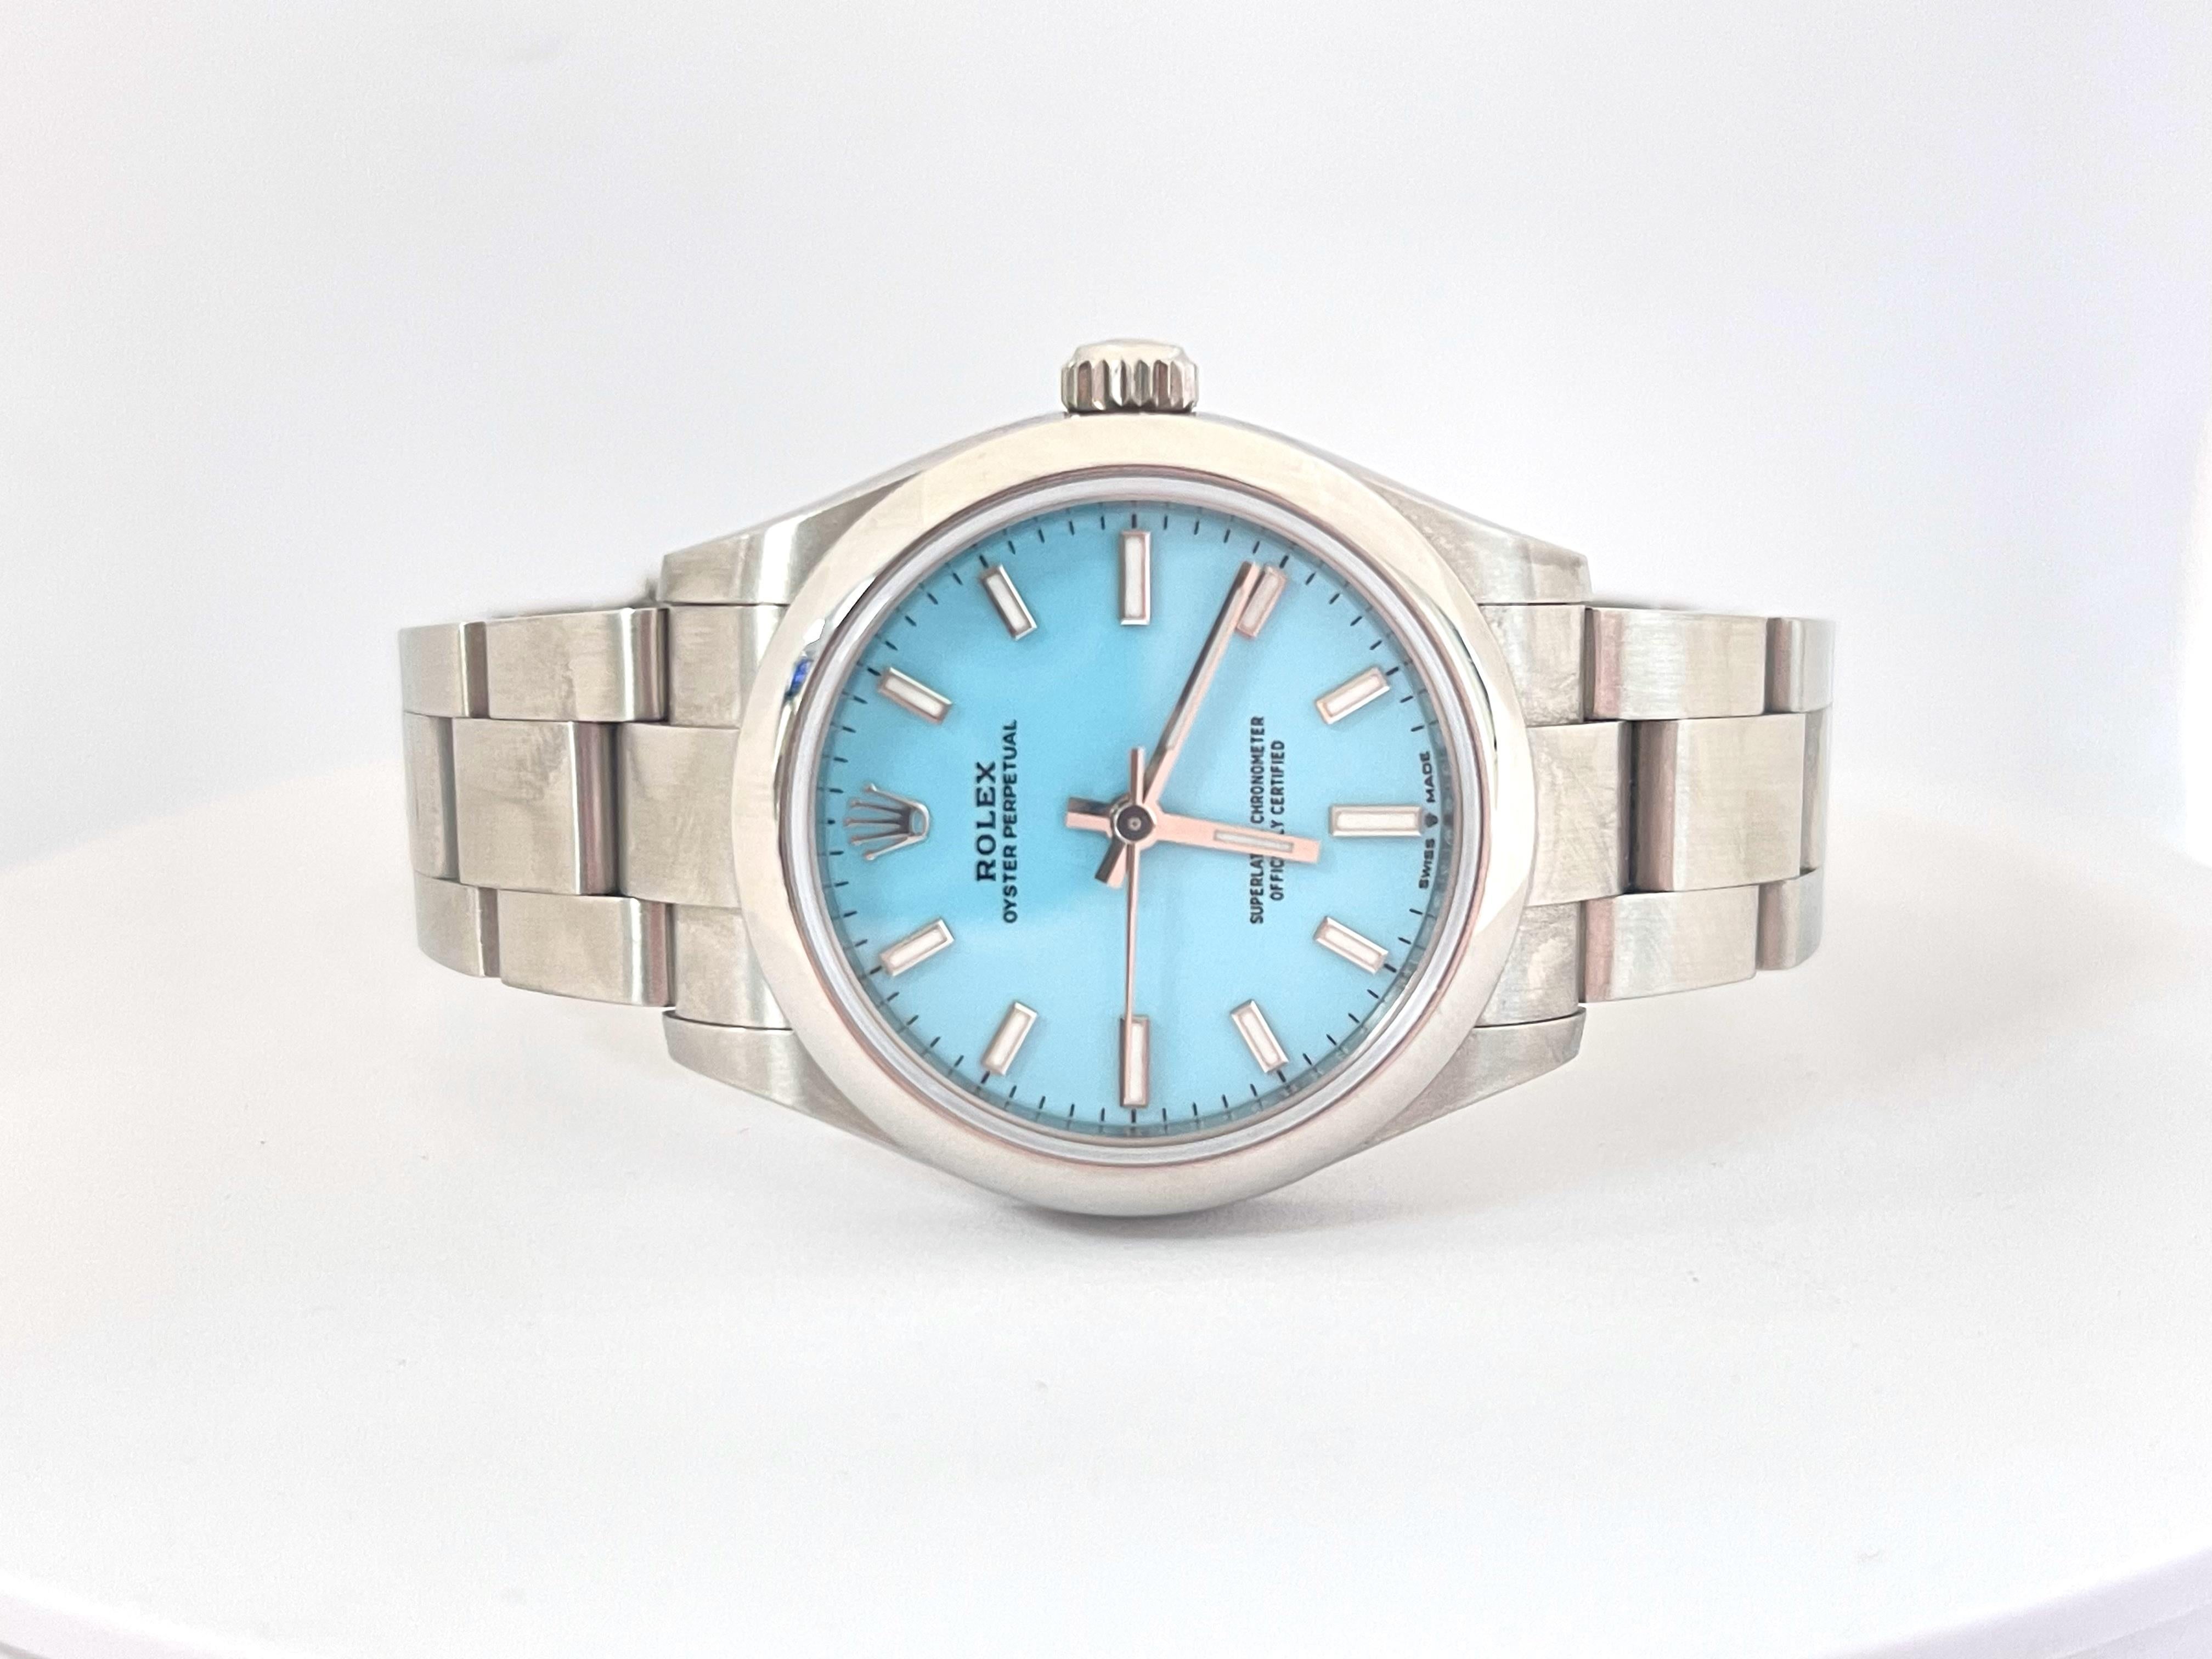 Rolex Oyster Perpetual 31mm Turquoise Blue Dial Steel Watch 277200. This watch is one of the most desirable colors in this category. Brand new never been used with a white tag attached. 

*Free Shipping within the U.S.*